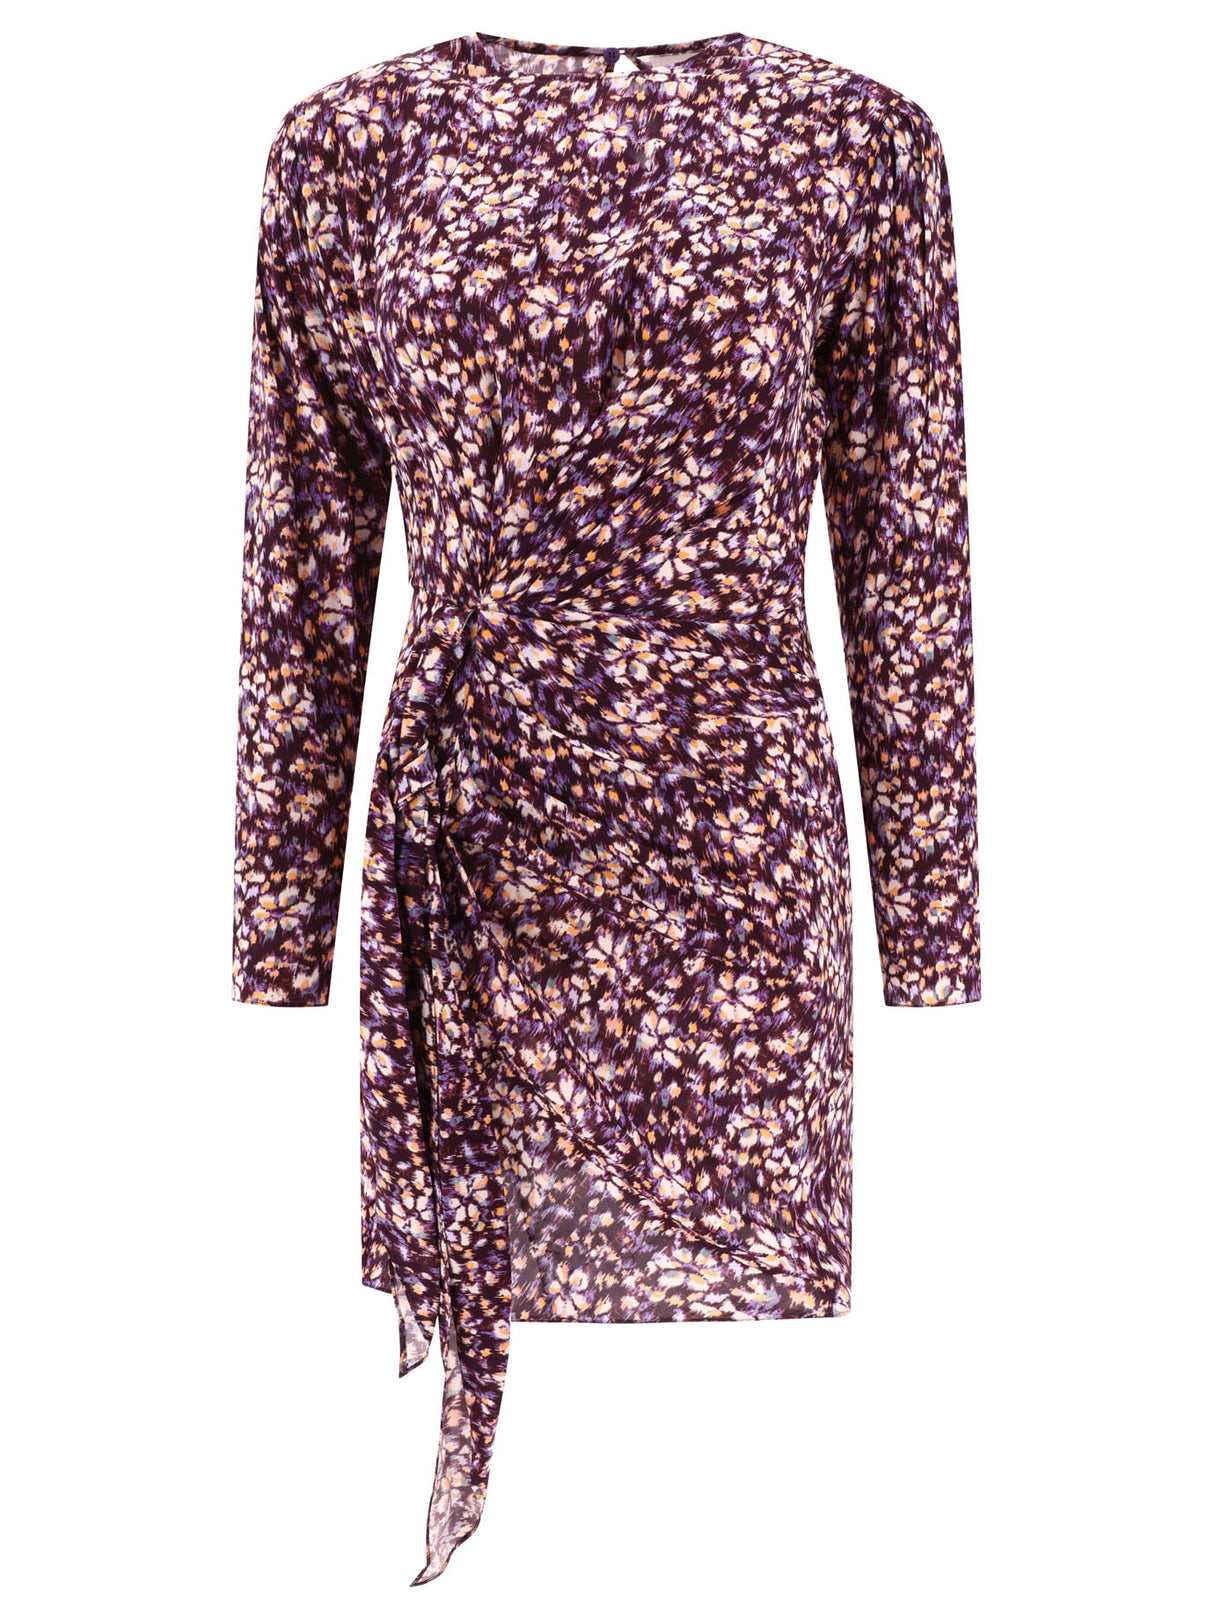 ISABEL MARANT ETOILE Purple Ruffle Bow Dress for Women - FW23 Collection